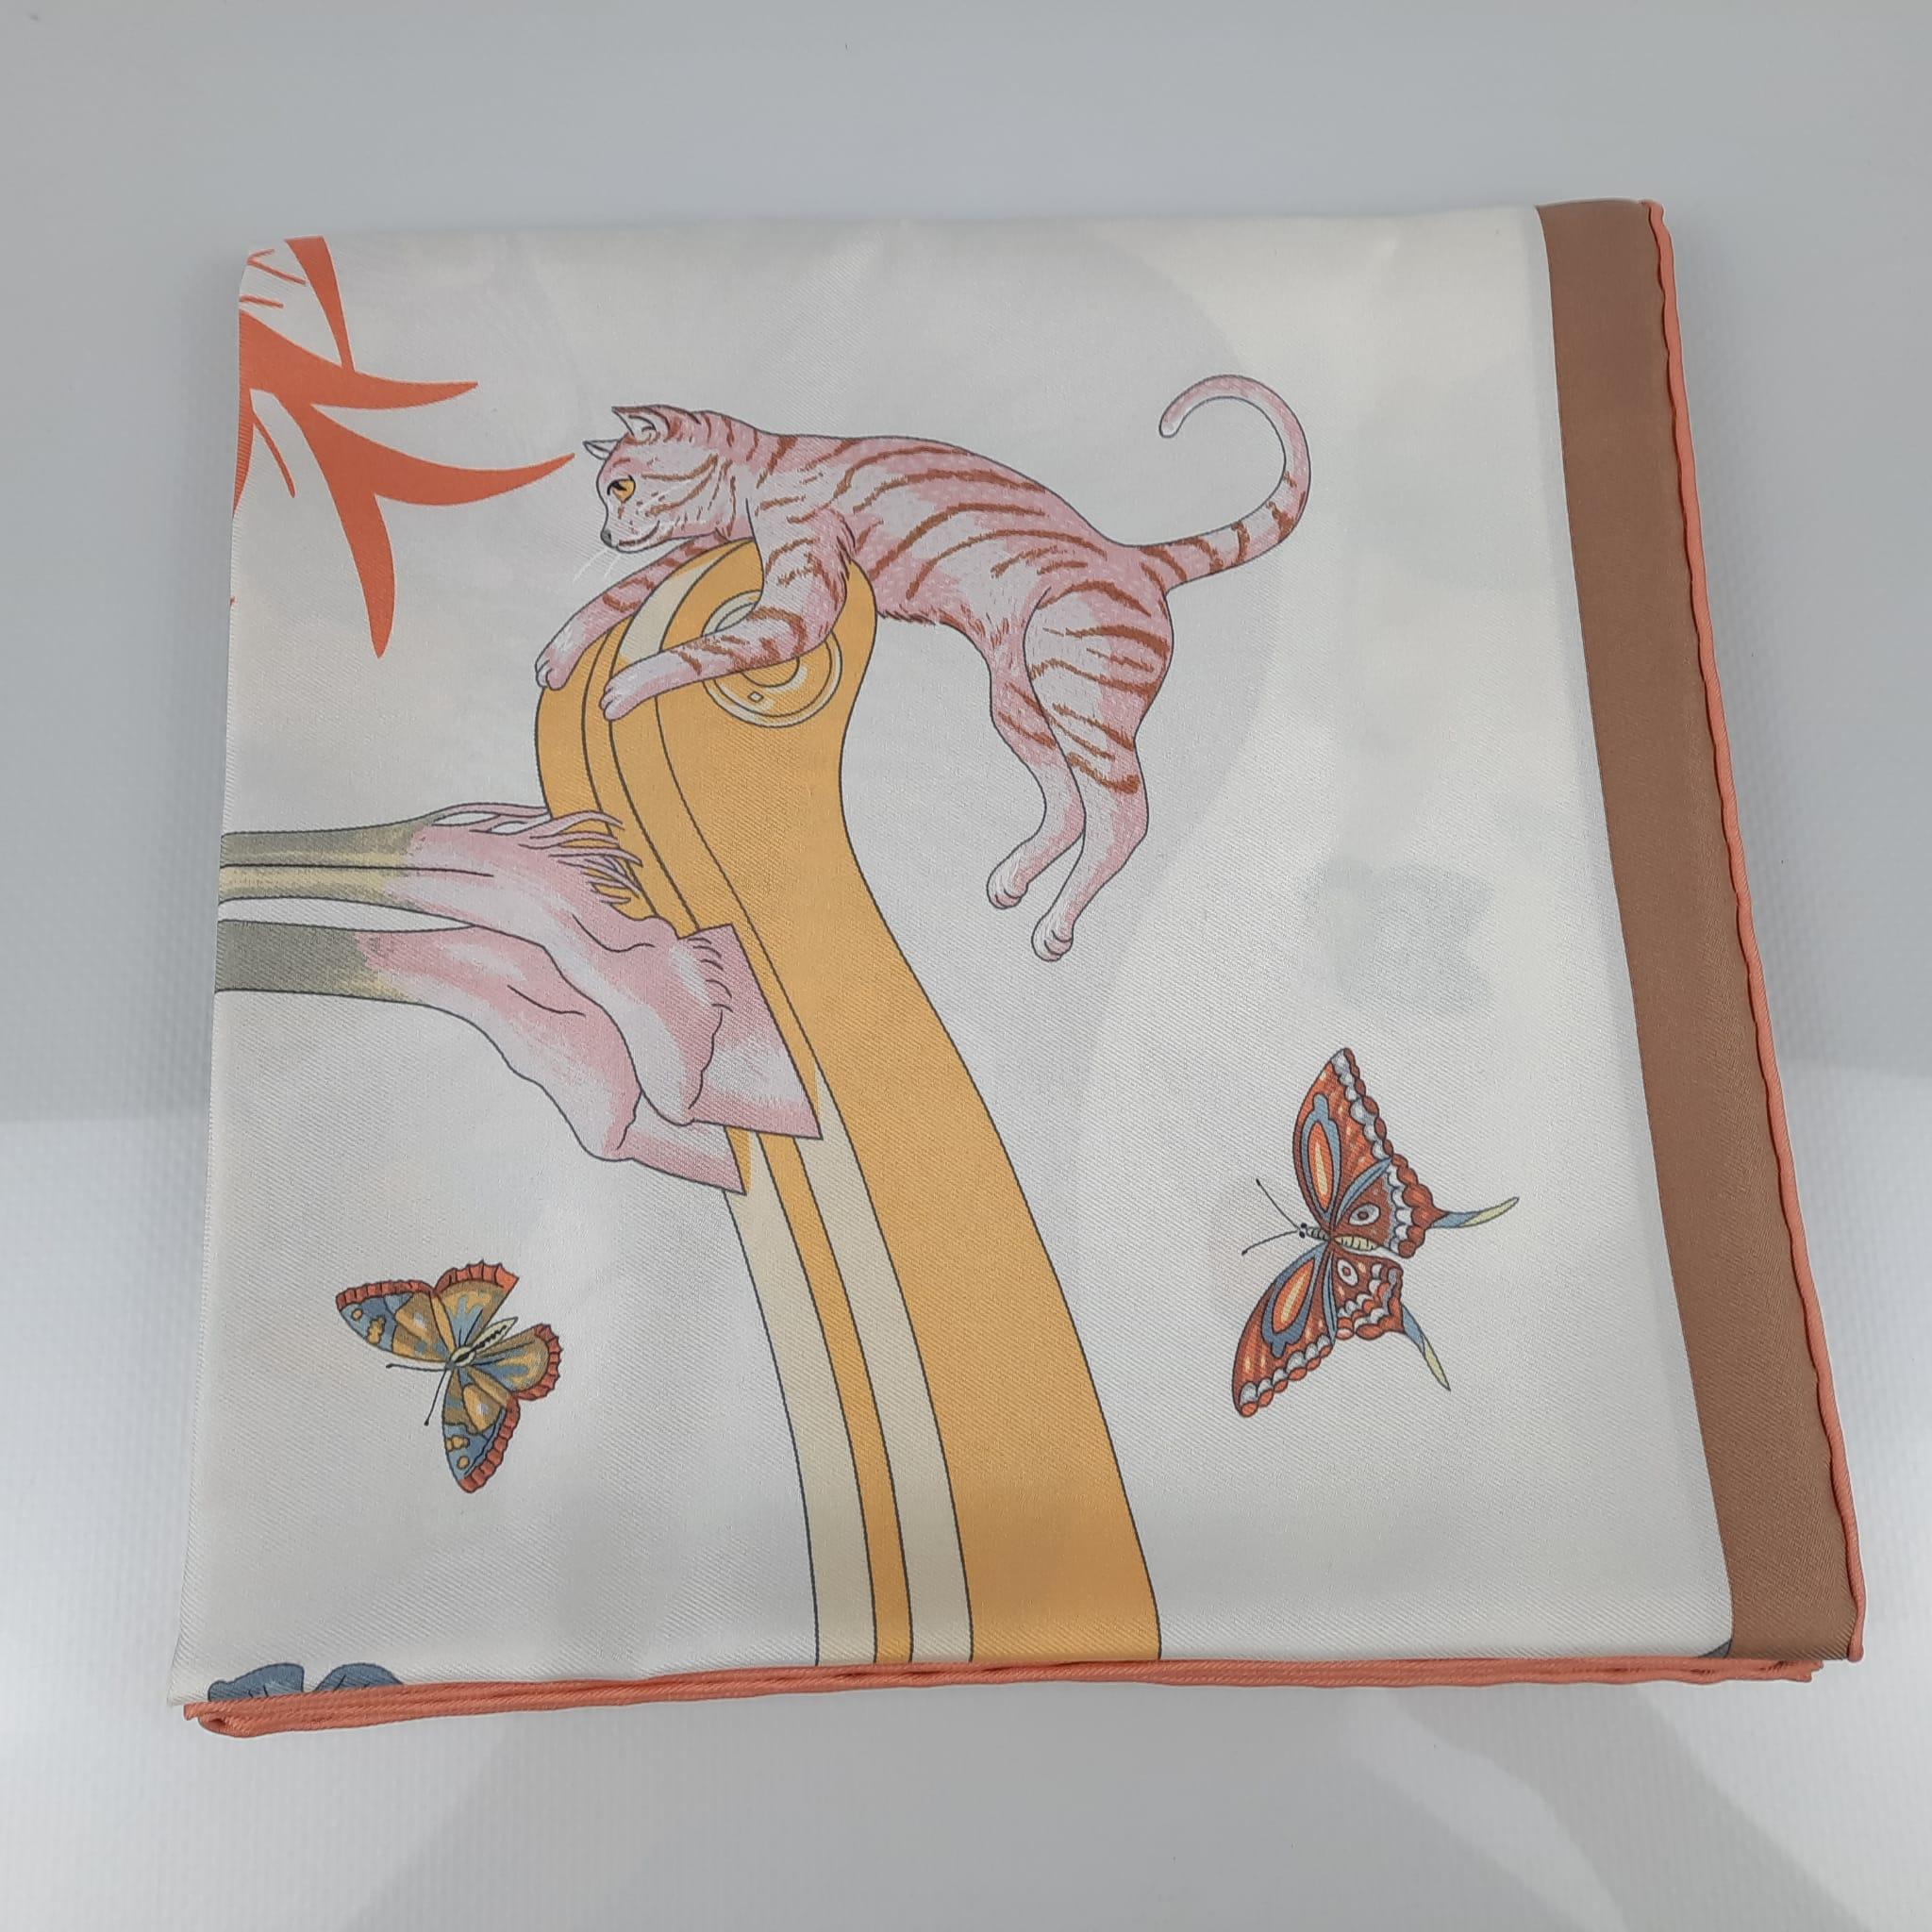 Scarf in silk twill with hand-rolled edges (100% silk).
This essential Hermès accessory complements any outfit. It can be worn many ways - around your neck, as a top, at the waist or as a headscarf!
Designed by Jonathan Burton